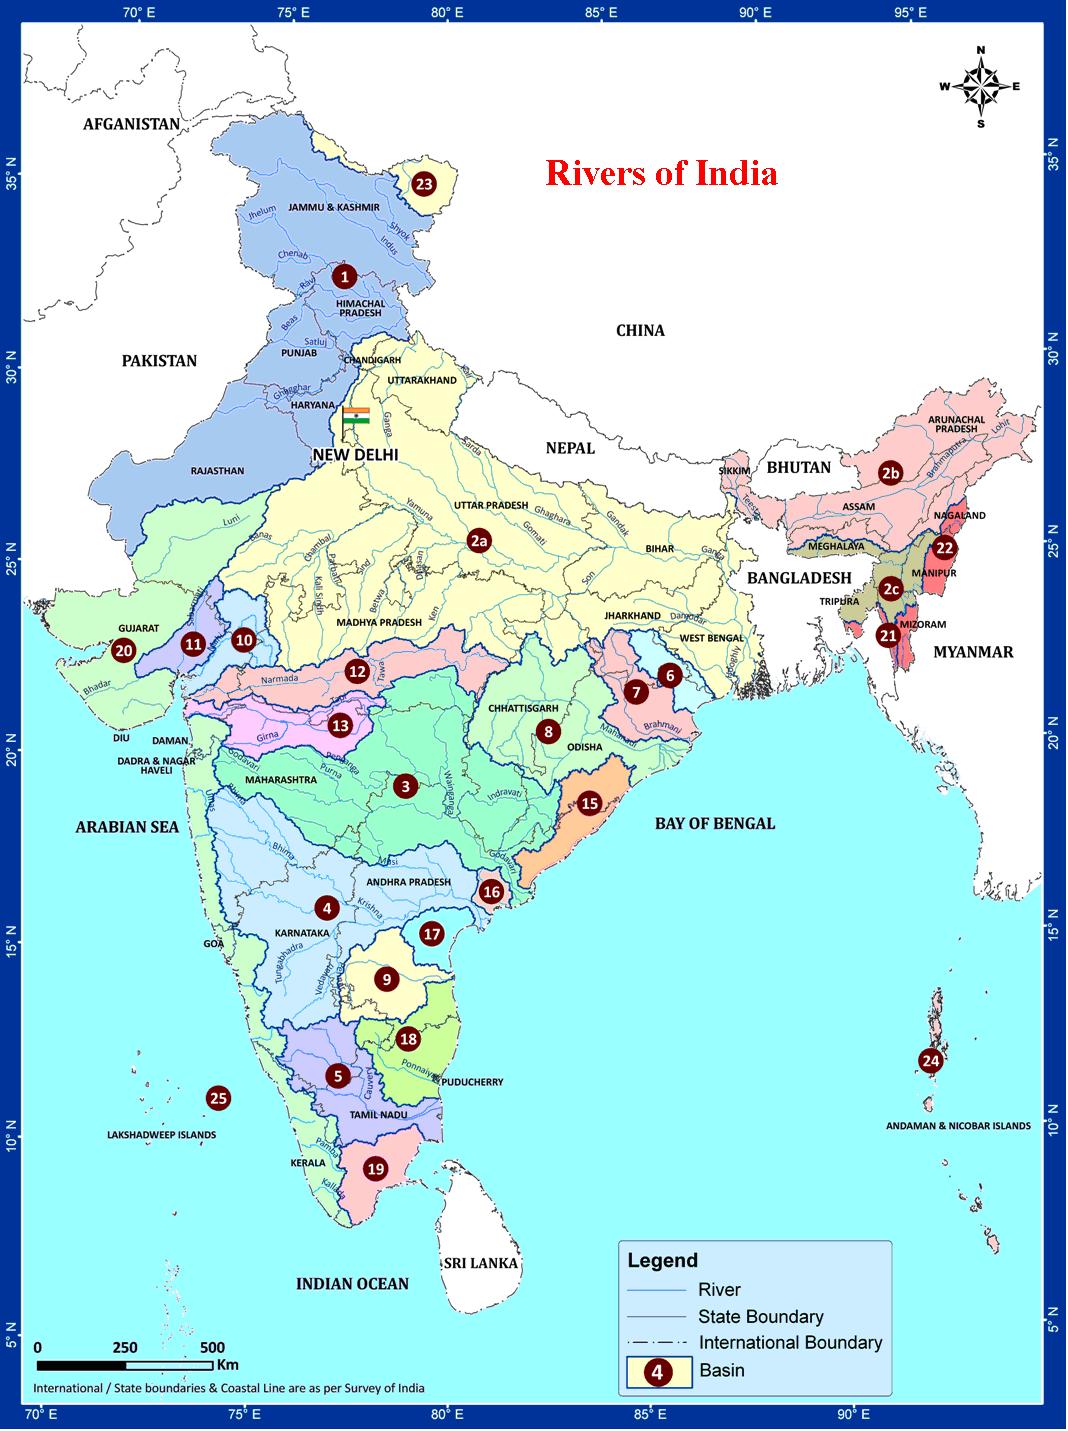 rivers of india and development of indian civilization essay